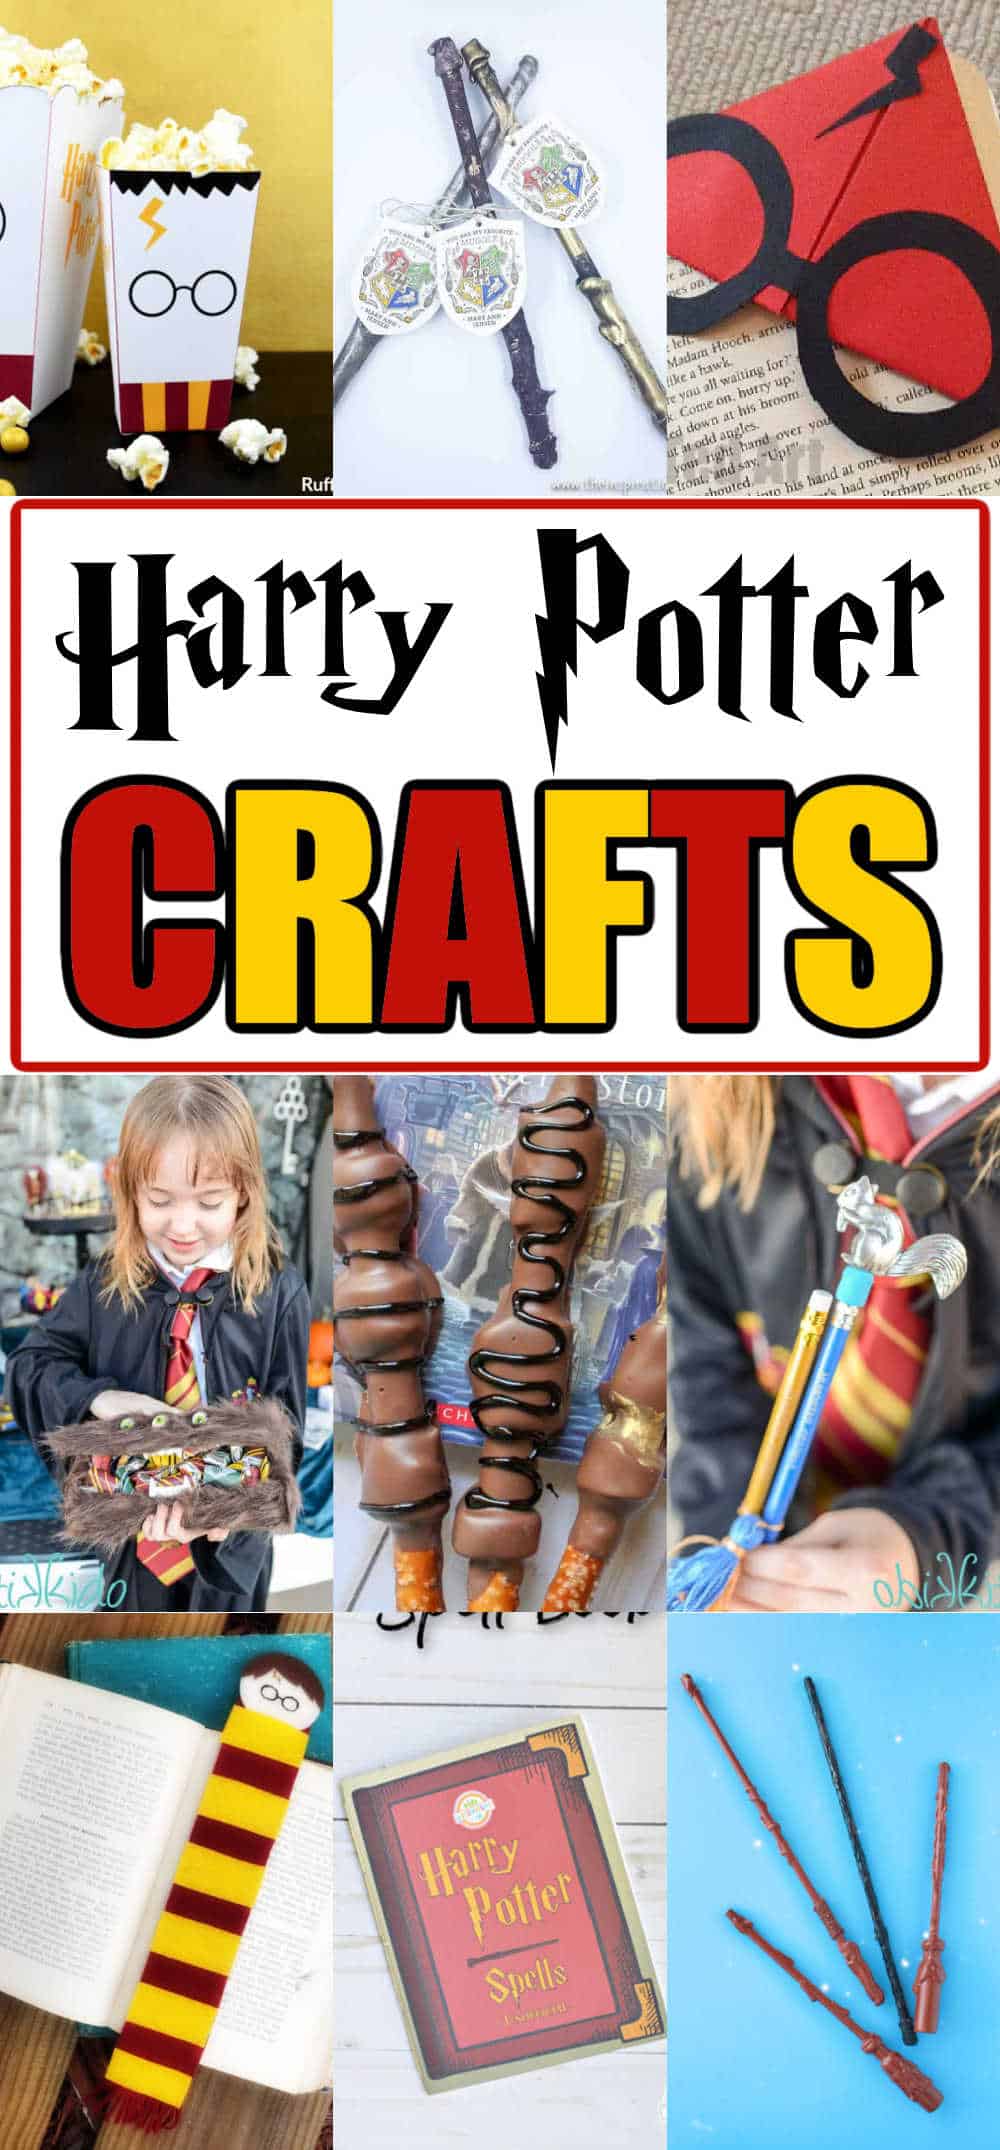 Harry Potter Snitch Craft/ Treat - Red Ted Art - Kids Crafts